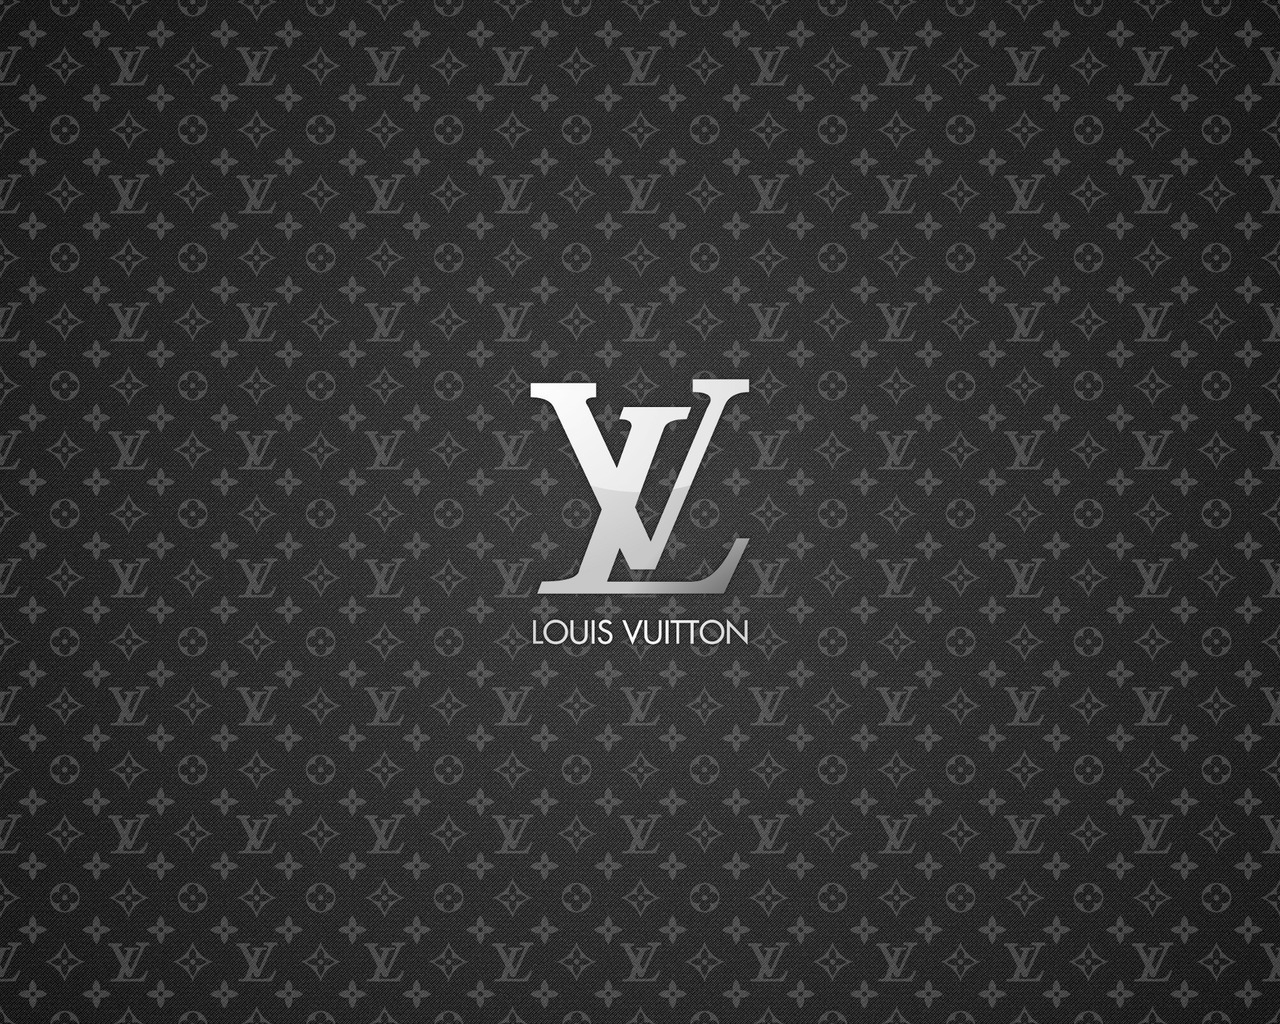 Louis Vuitton for 1280 x 1024 resolution